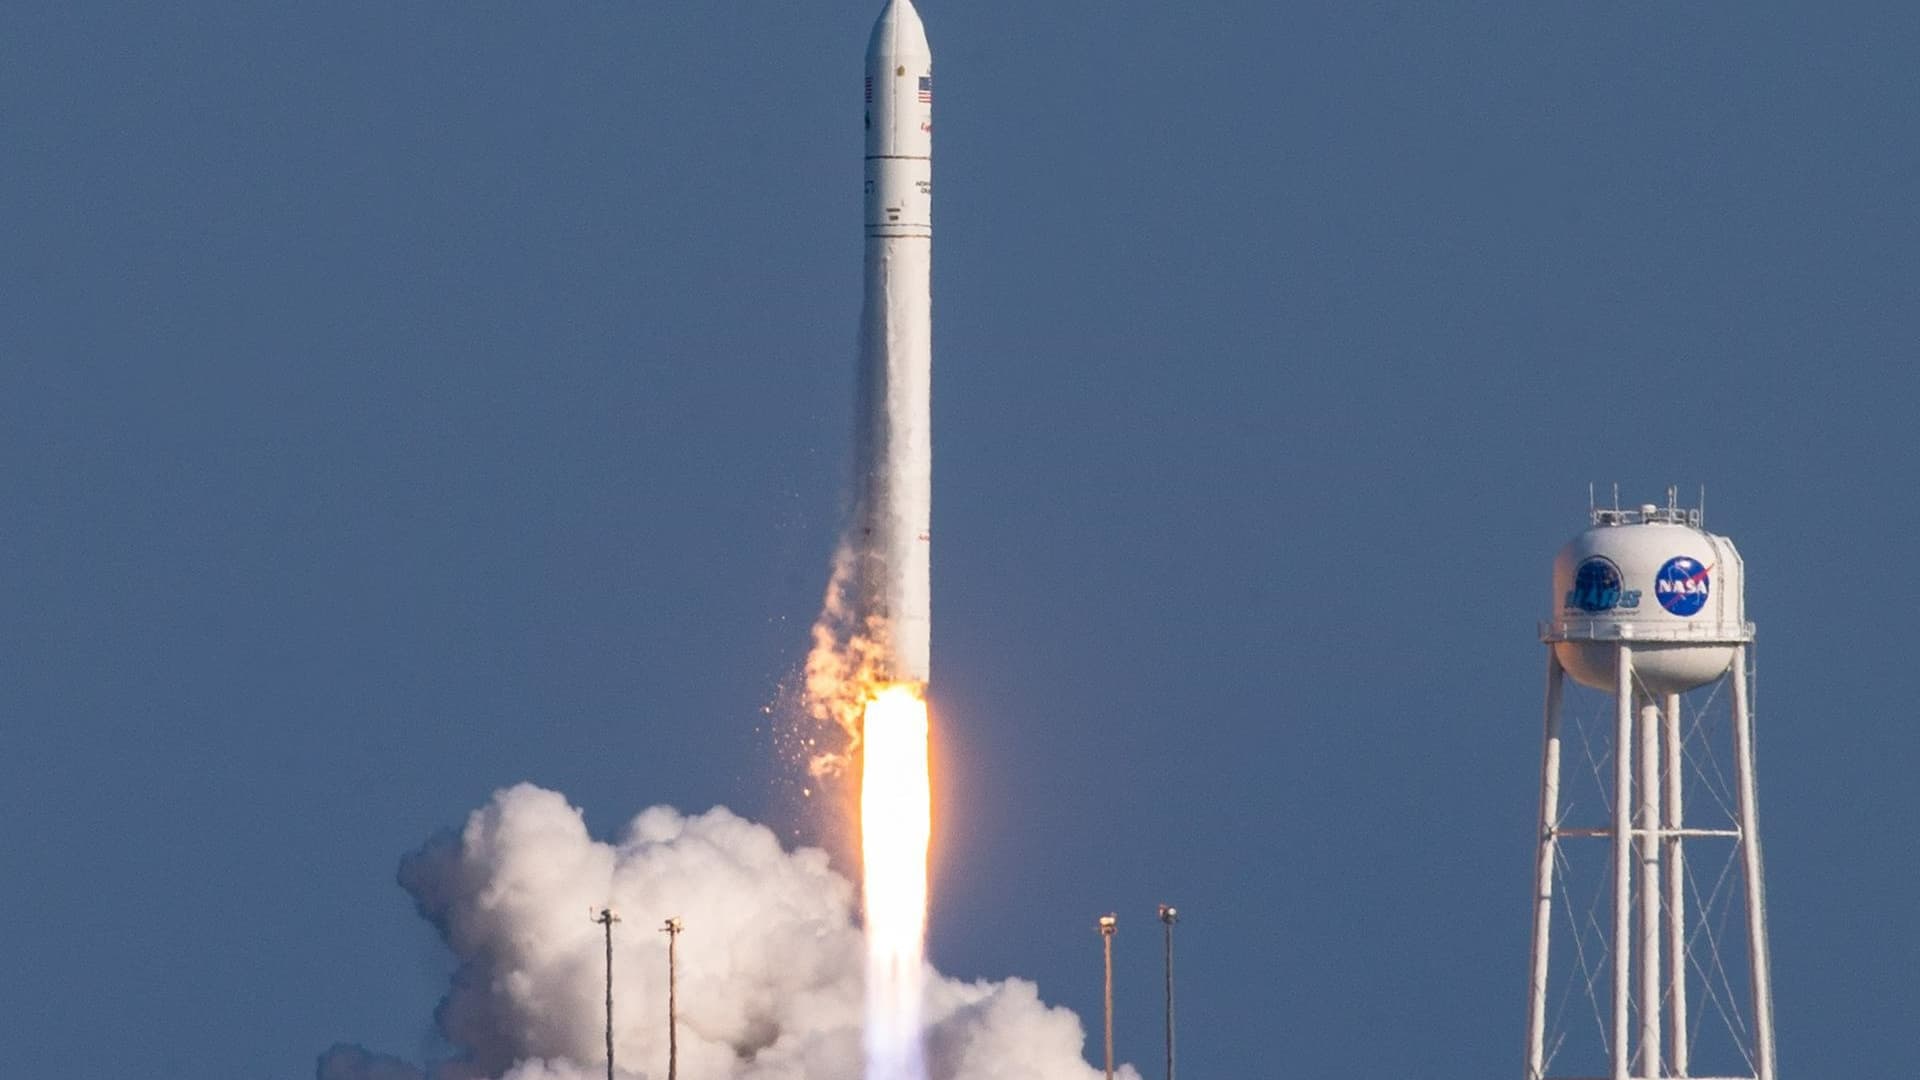 Northrop Grumman's Antares rocket lifts off from NASA's Wallops Flight Facility in Virginia on Aug. 10, 2021 carrying a Cygnus spacecraft with cargo for the International Space Station.